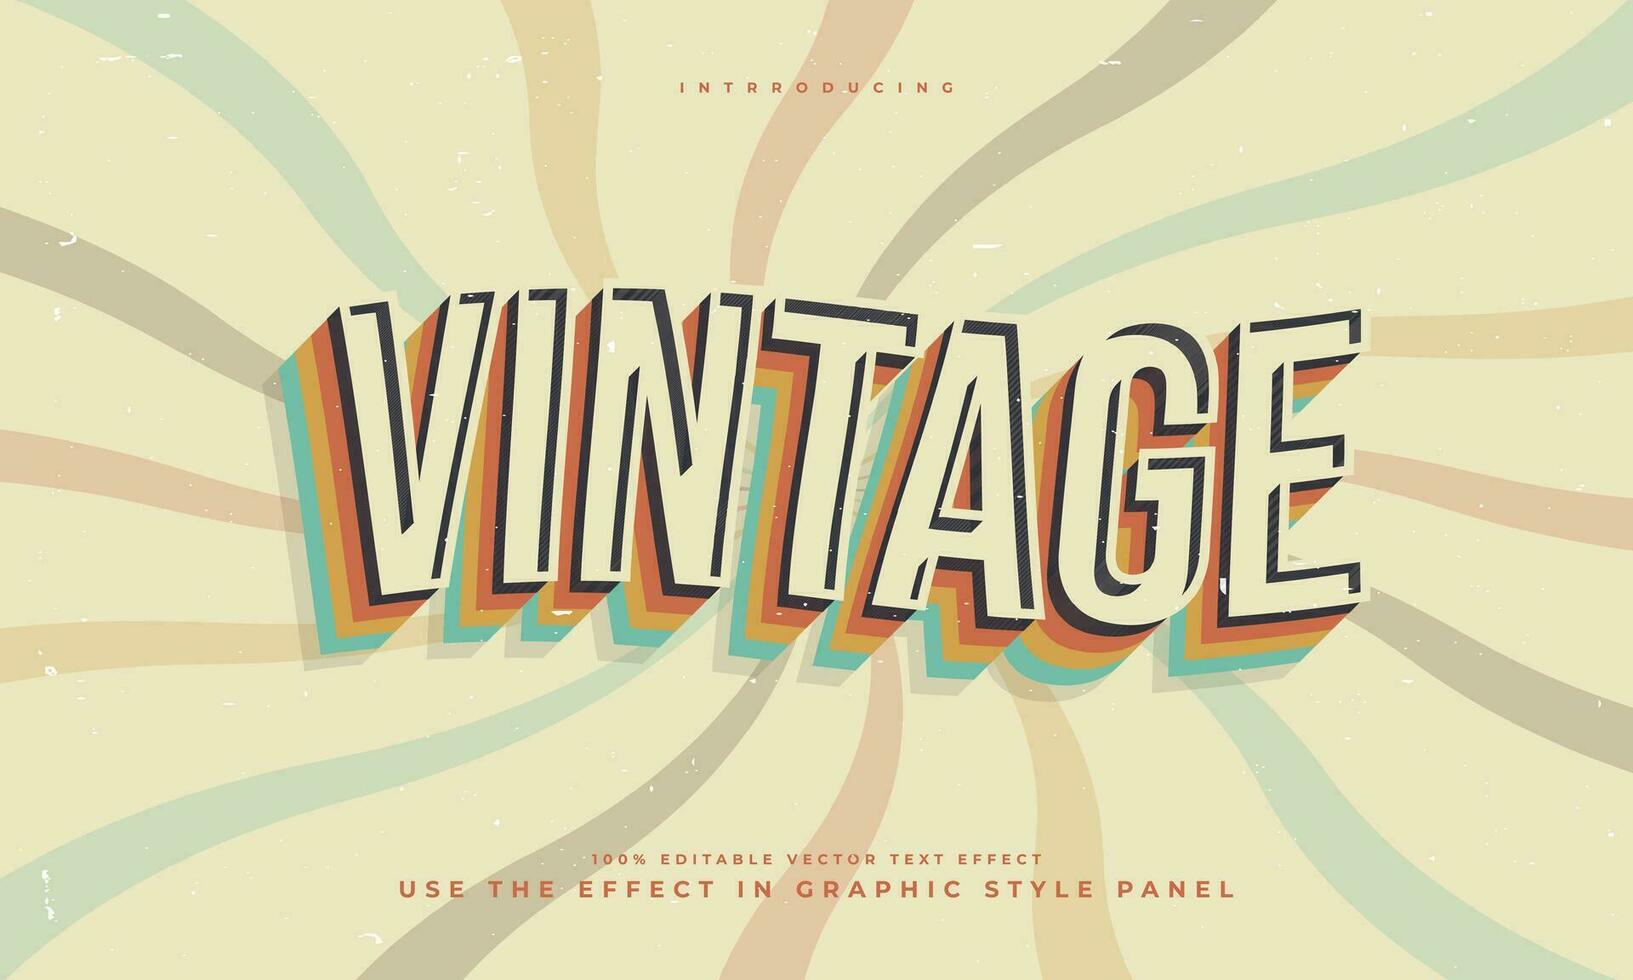 vintage retro grunge texture lettering style editable colorful rainbow vector text effect alphabet font typography